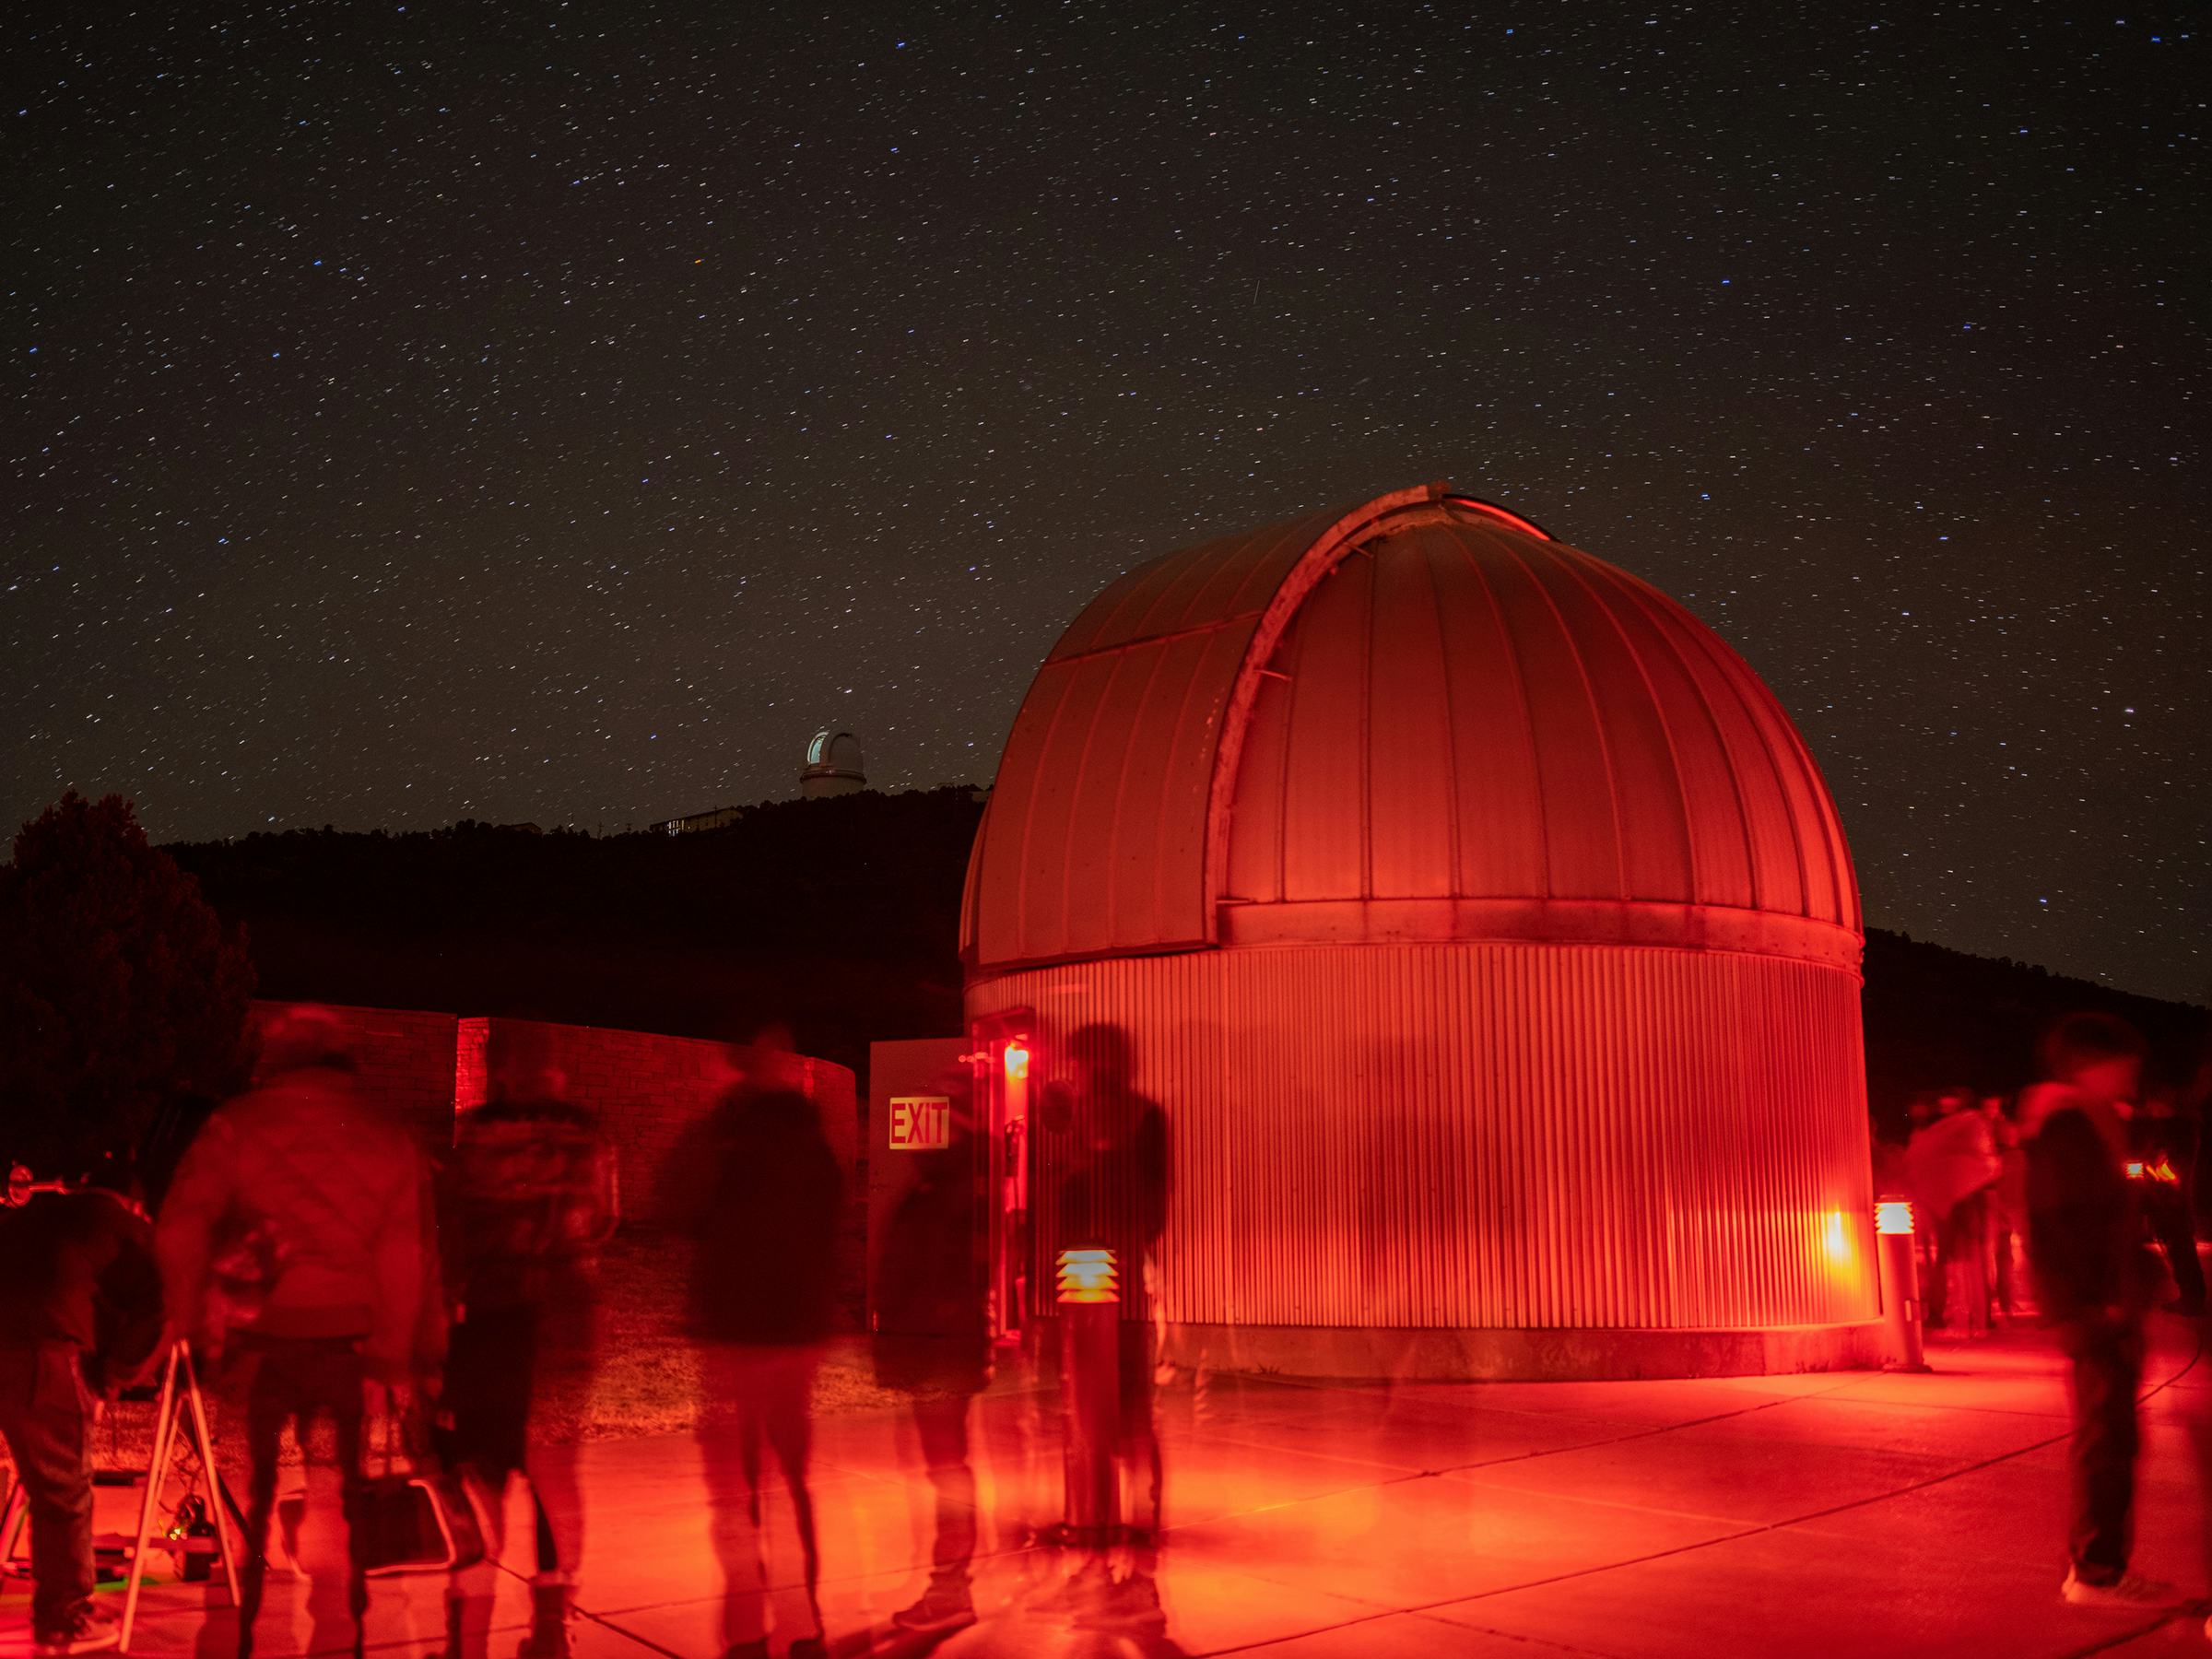 Photo of star party at the McDonald Observatory. Visitors stargazing near a large telescope at night.